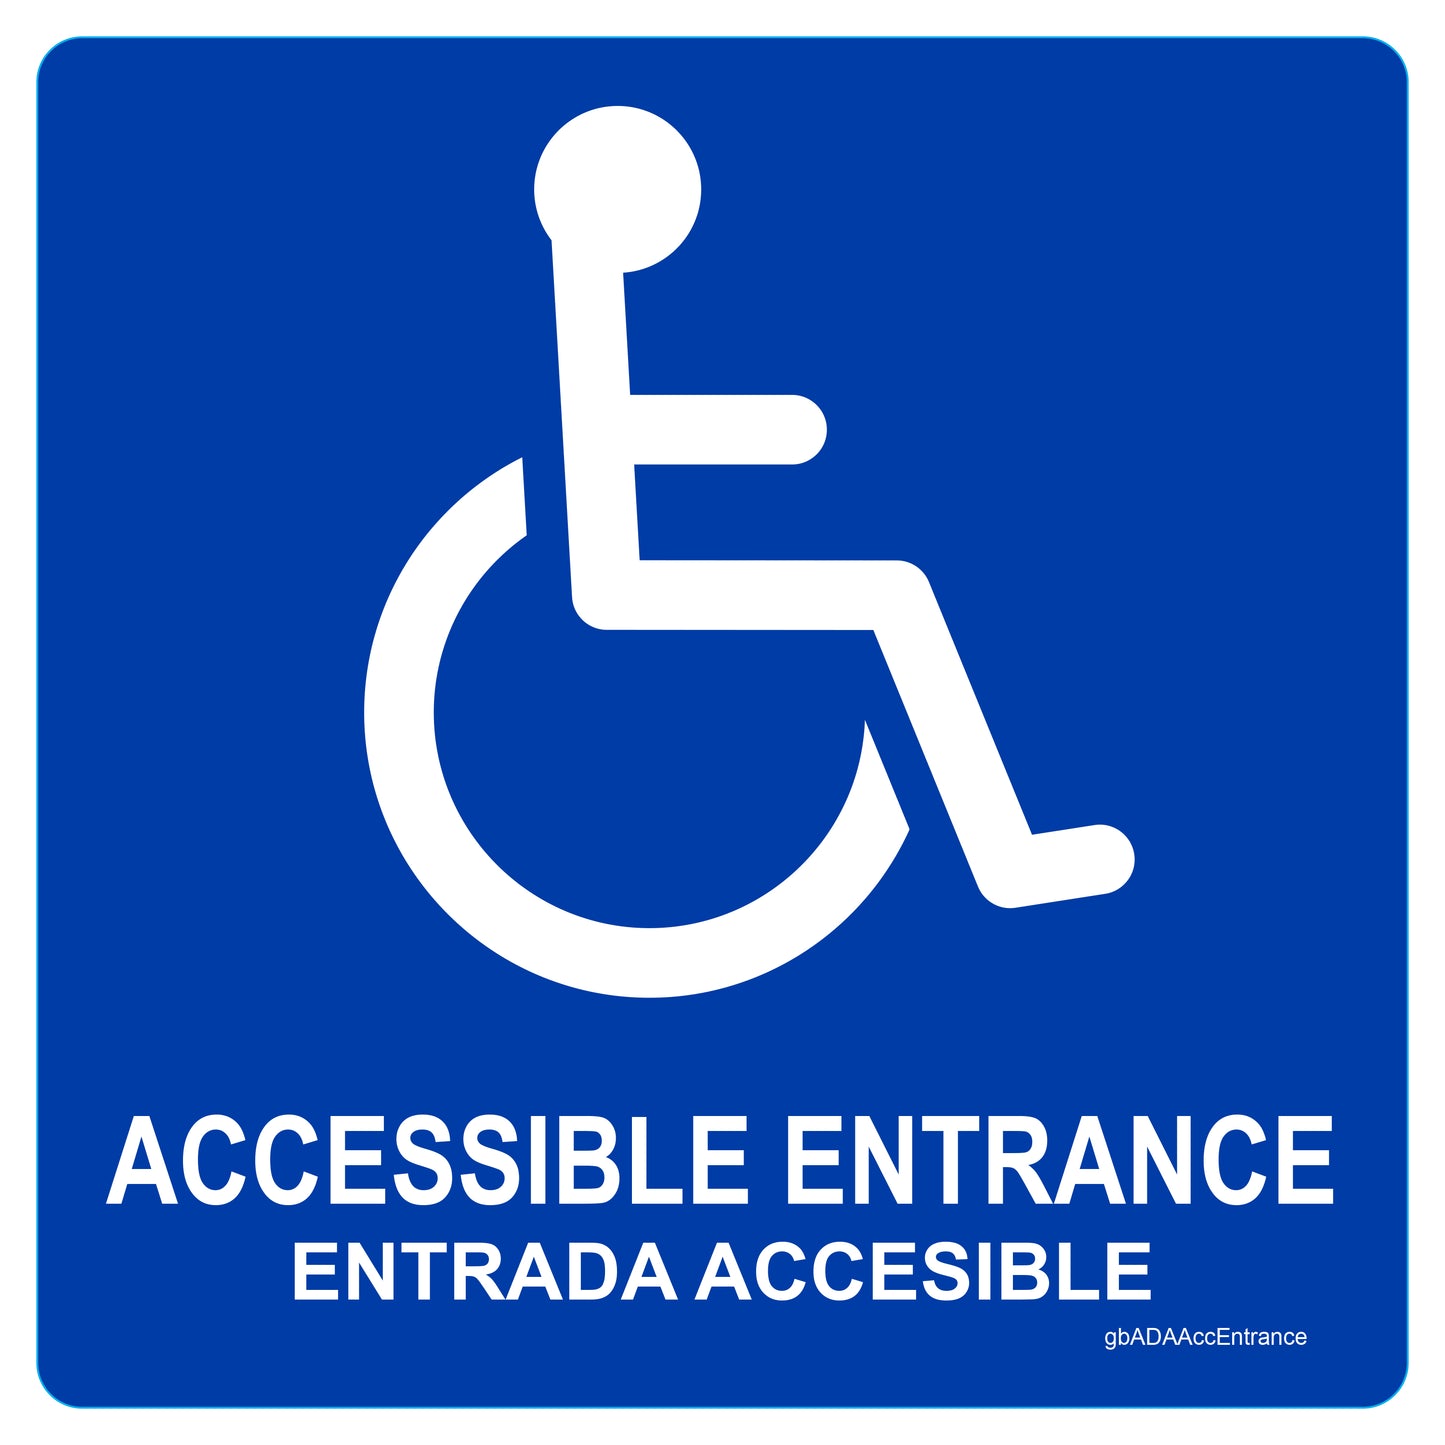 ADA Accessible Entrance Decal in English and Spanish. 5 inches by 5 inches in size.